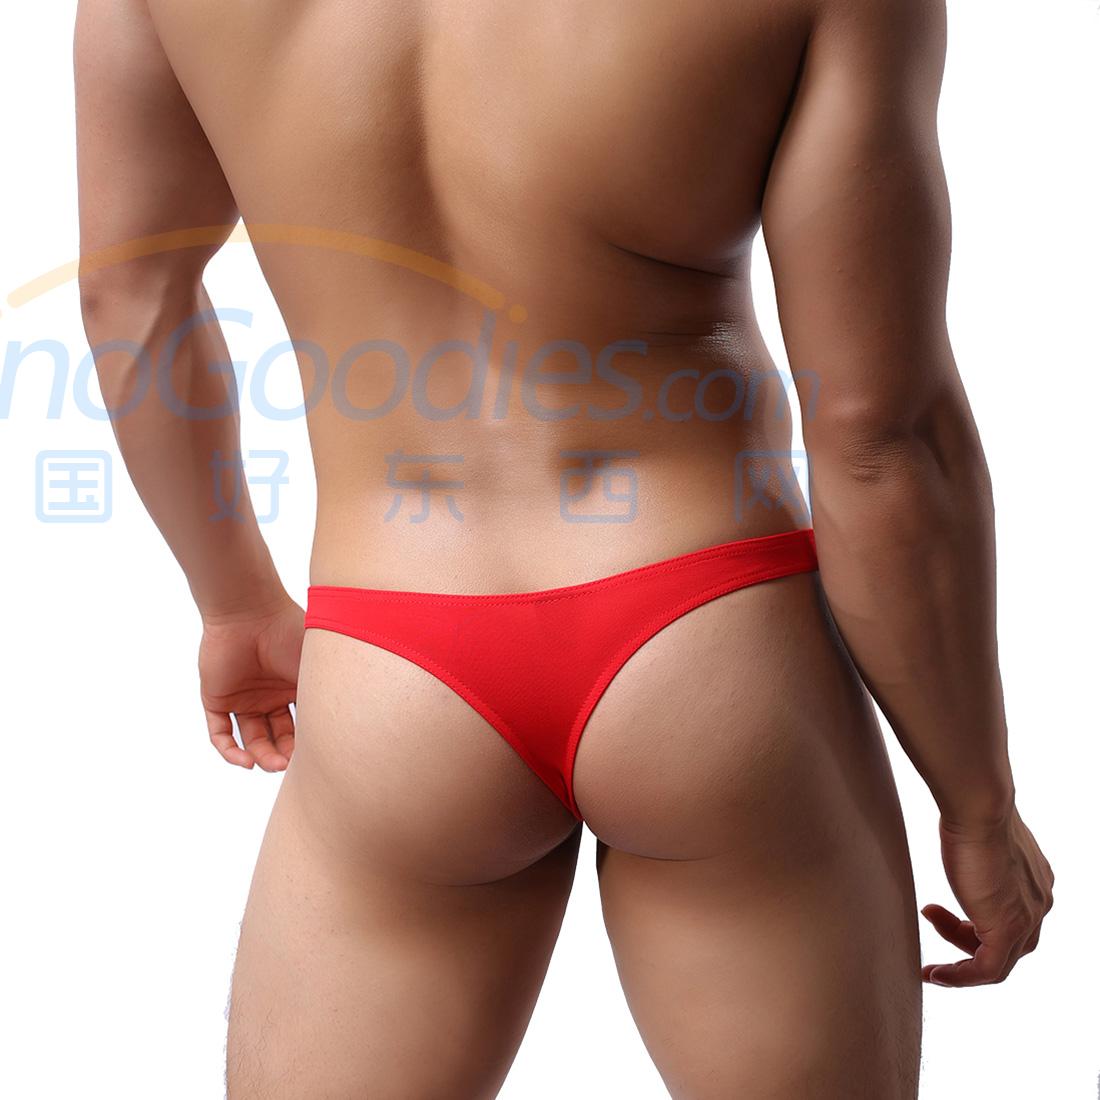 Men's Sexy Lingerie Underwear Modal Triangle Pants Shorts with Penis Sheath JET Bikini WH9 Red M